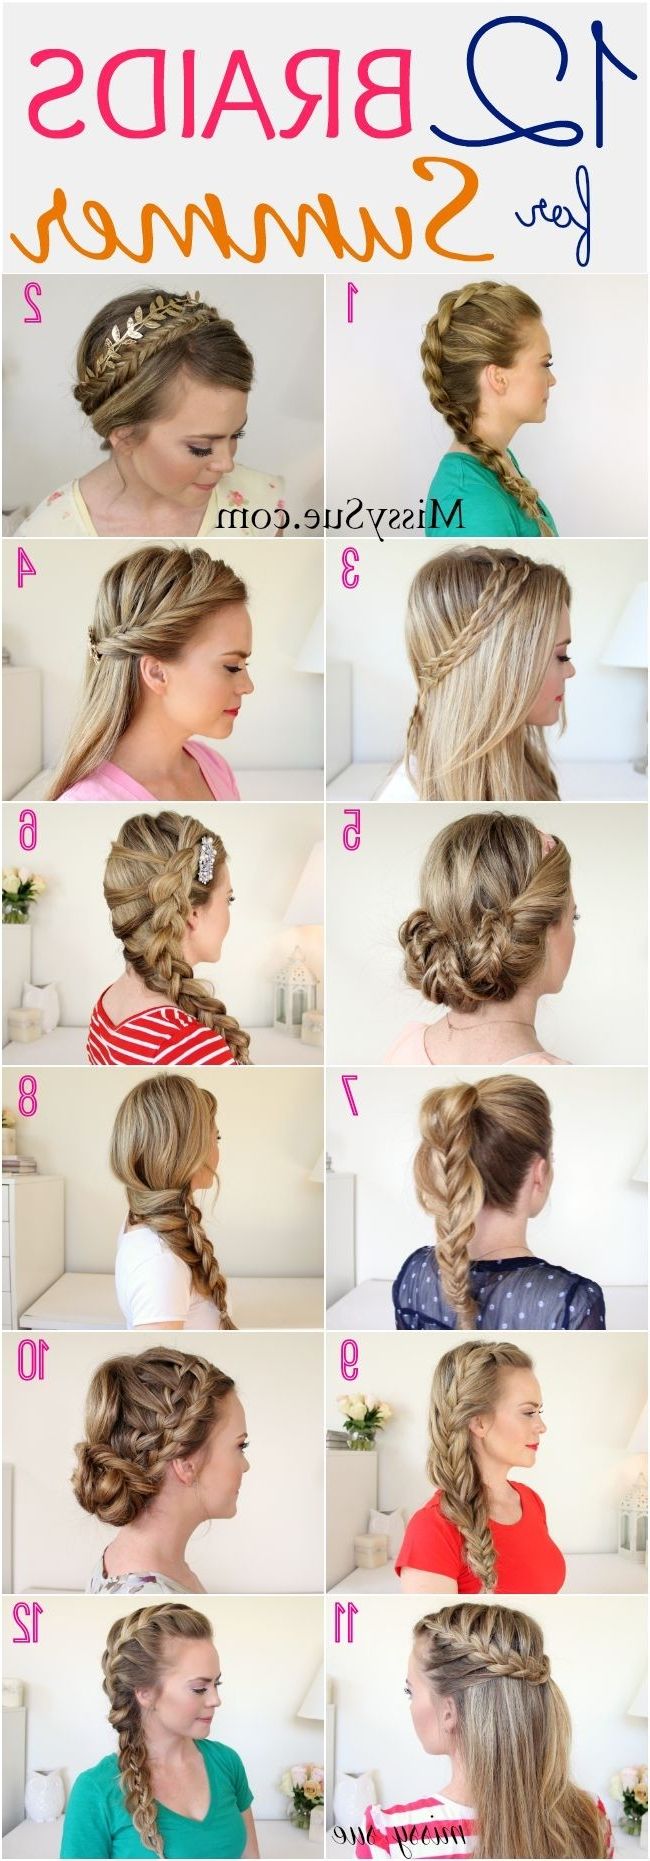 Latest High Rope Braid Hairstyles With 26 Pretty Braided Hairstyle For Summer – Popular Haircuts (View 9 of 20)